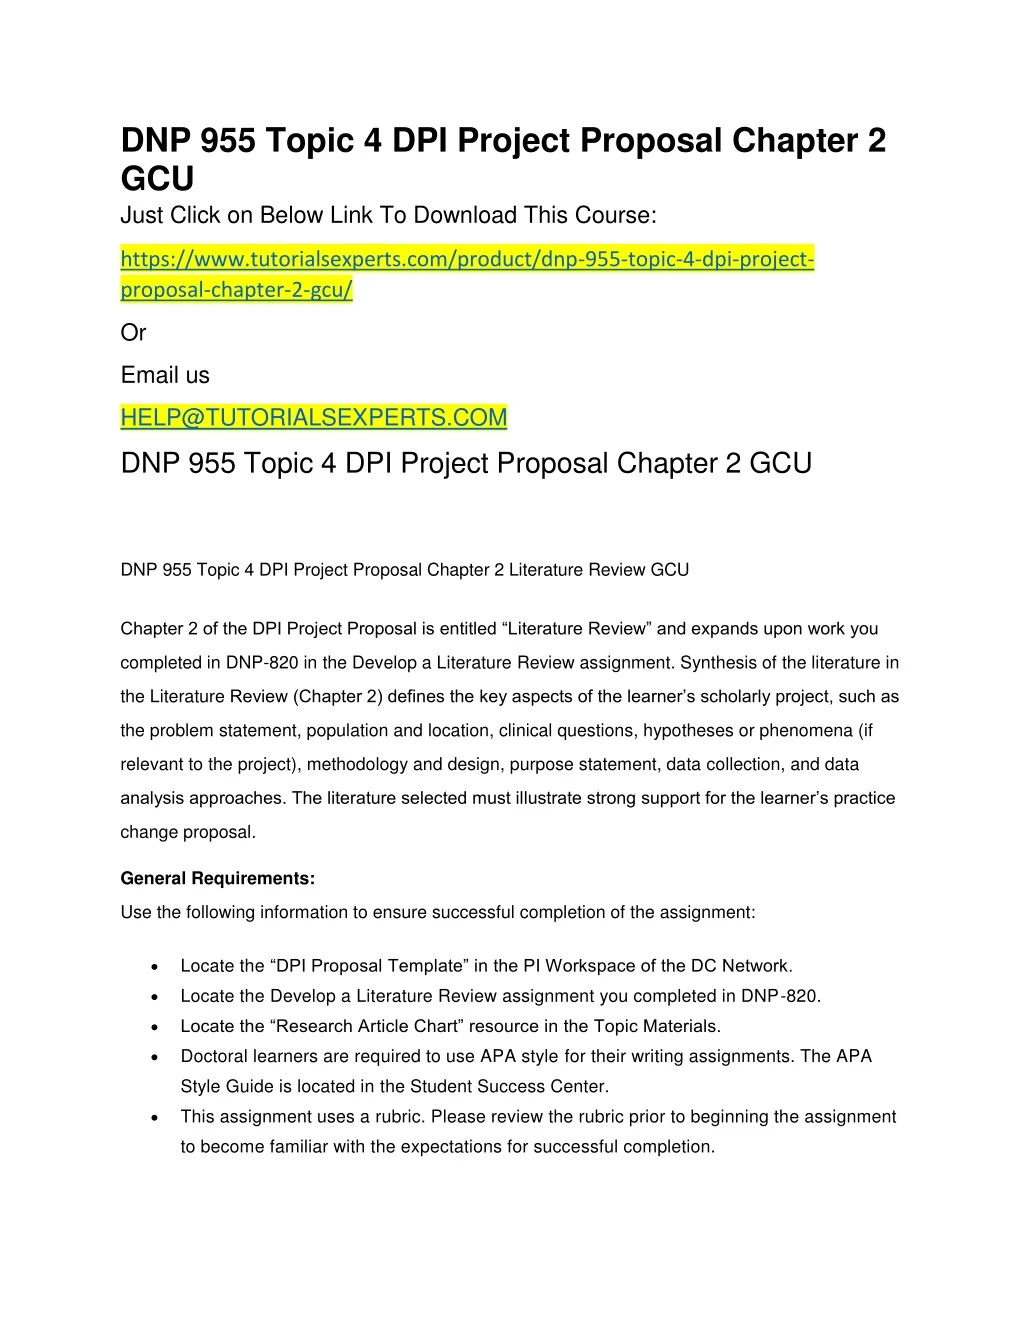 dnp 955 topic 4 dpi project proposal chapter